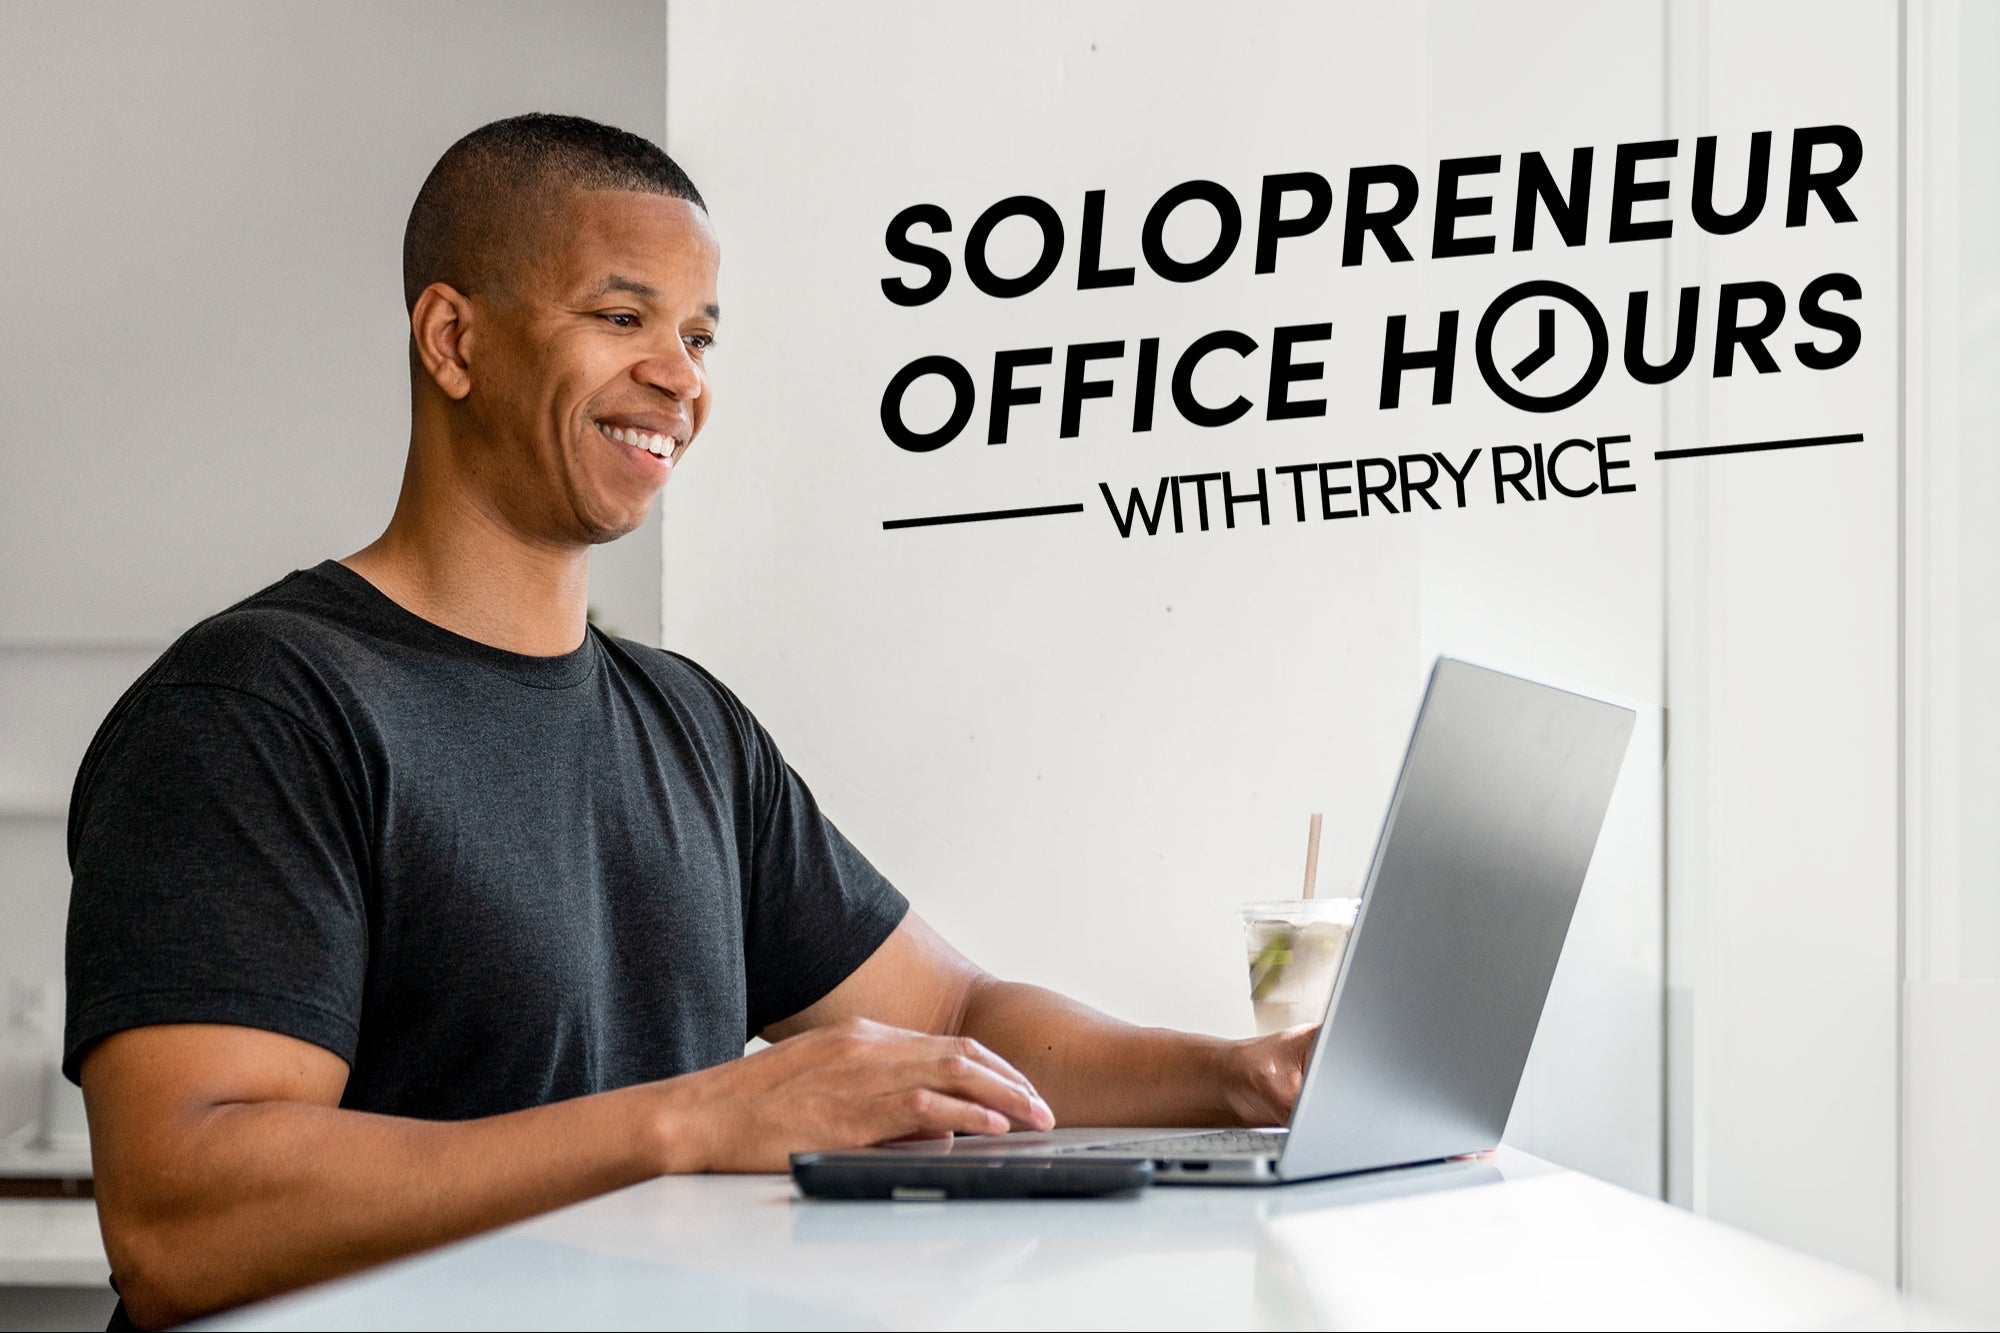 Free Event | March 30: Solopreneur Office Hours with Terry Rice